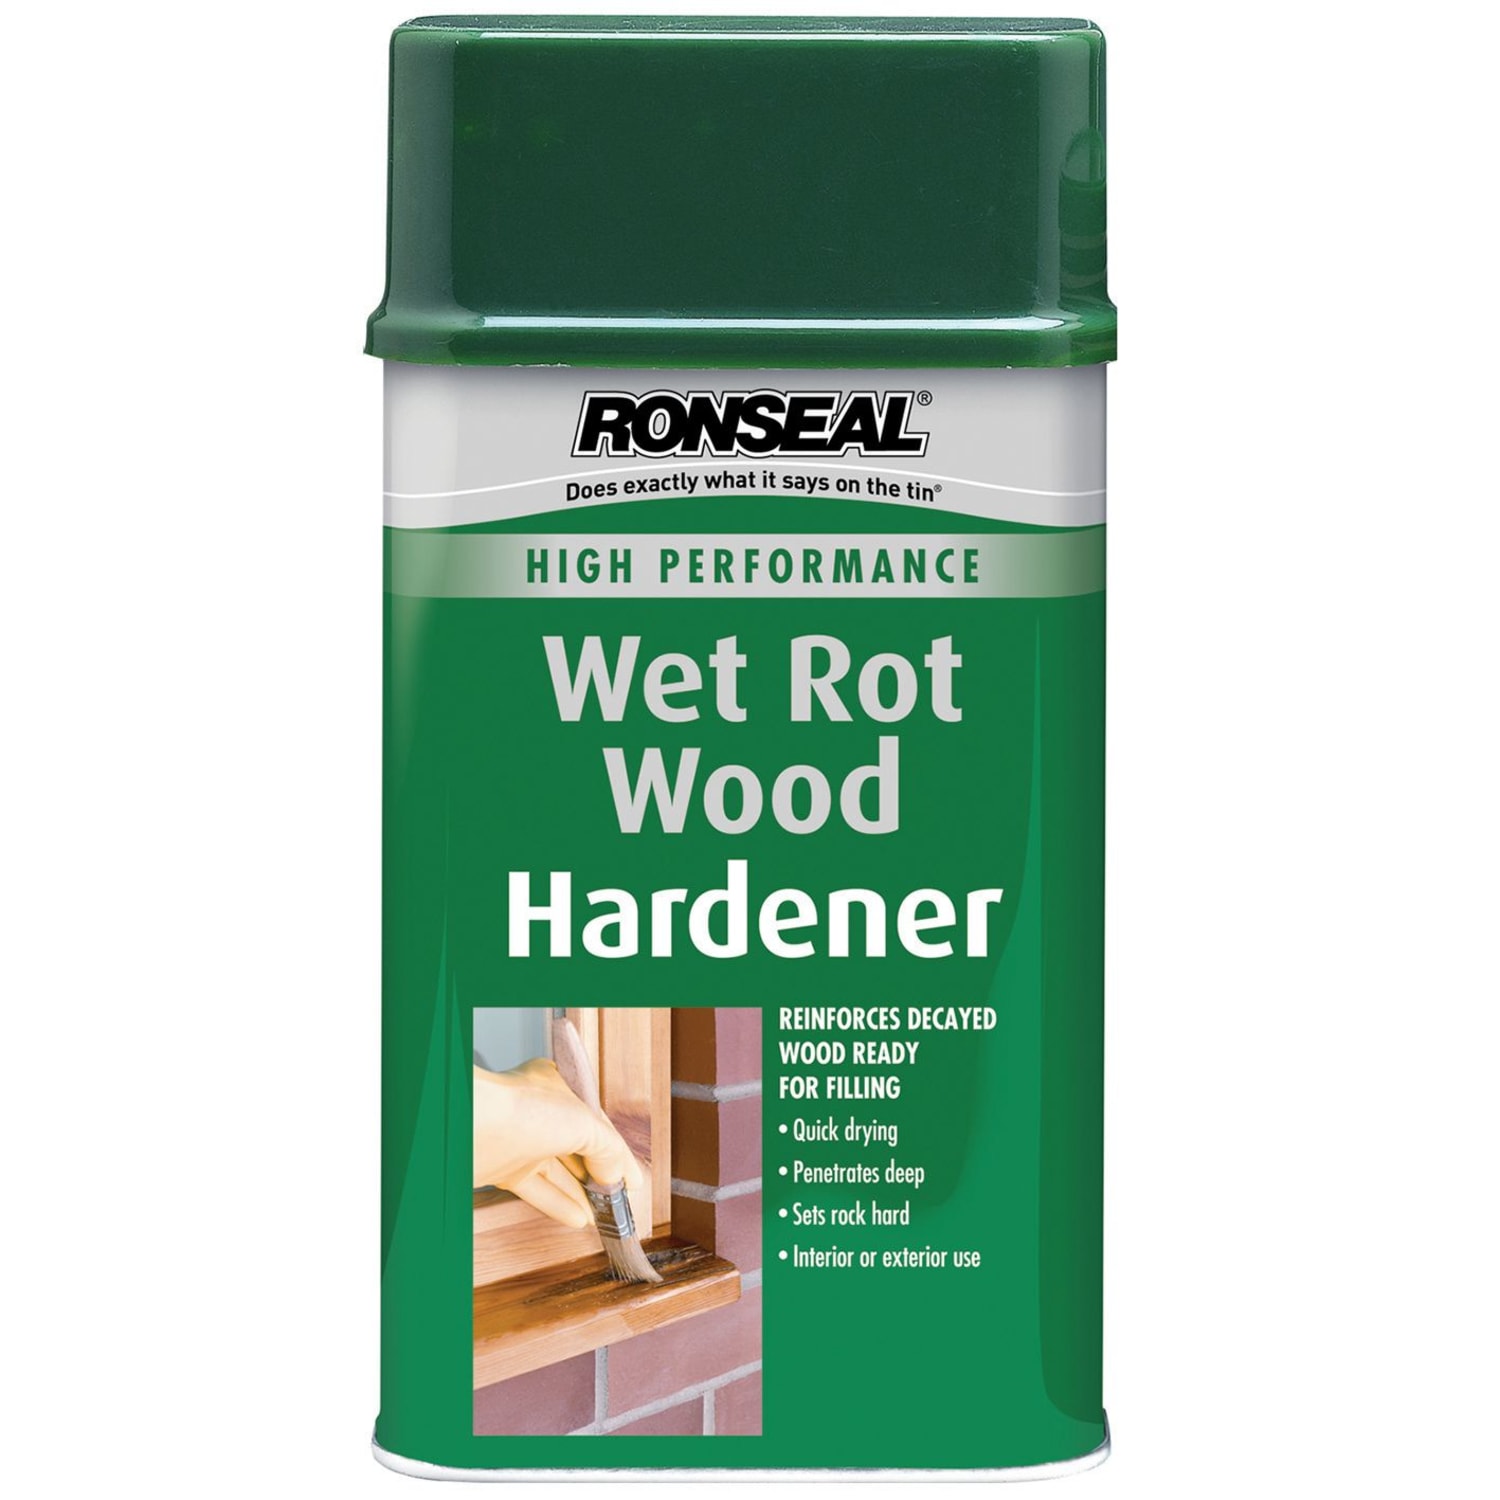 What Is Wood Hardener And Does It Have Real Benefits